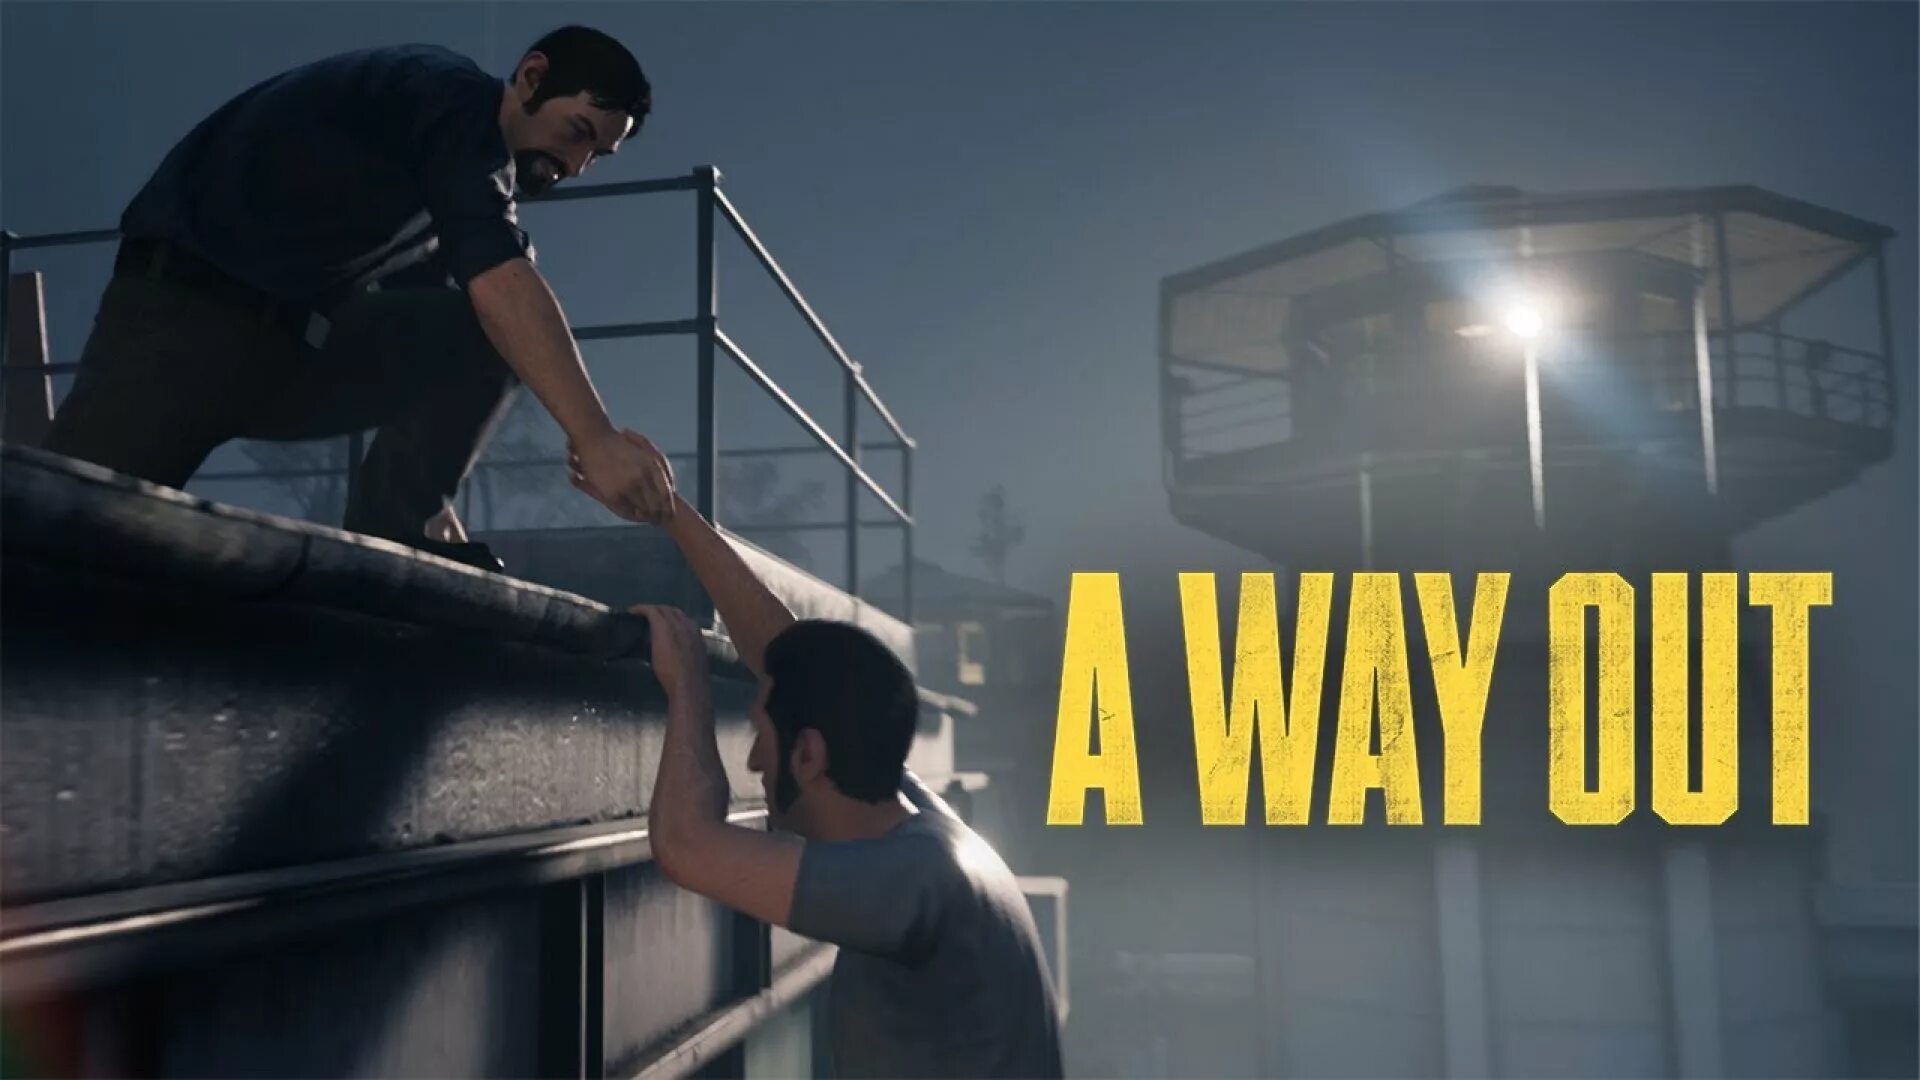 Побег из тюрьмы a way out. Way out игра. A way AOT. Игра про побег из тюрьмы на двоих. We are the way out